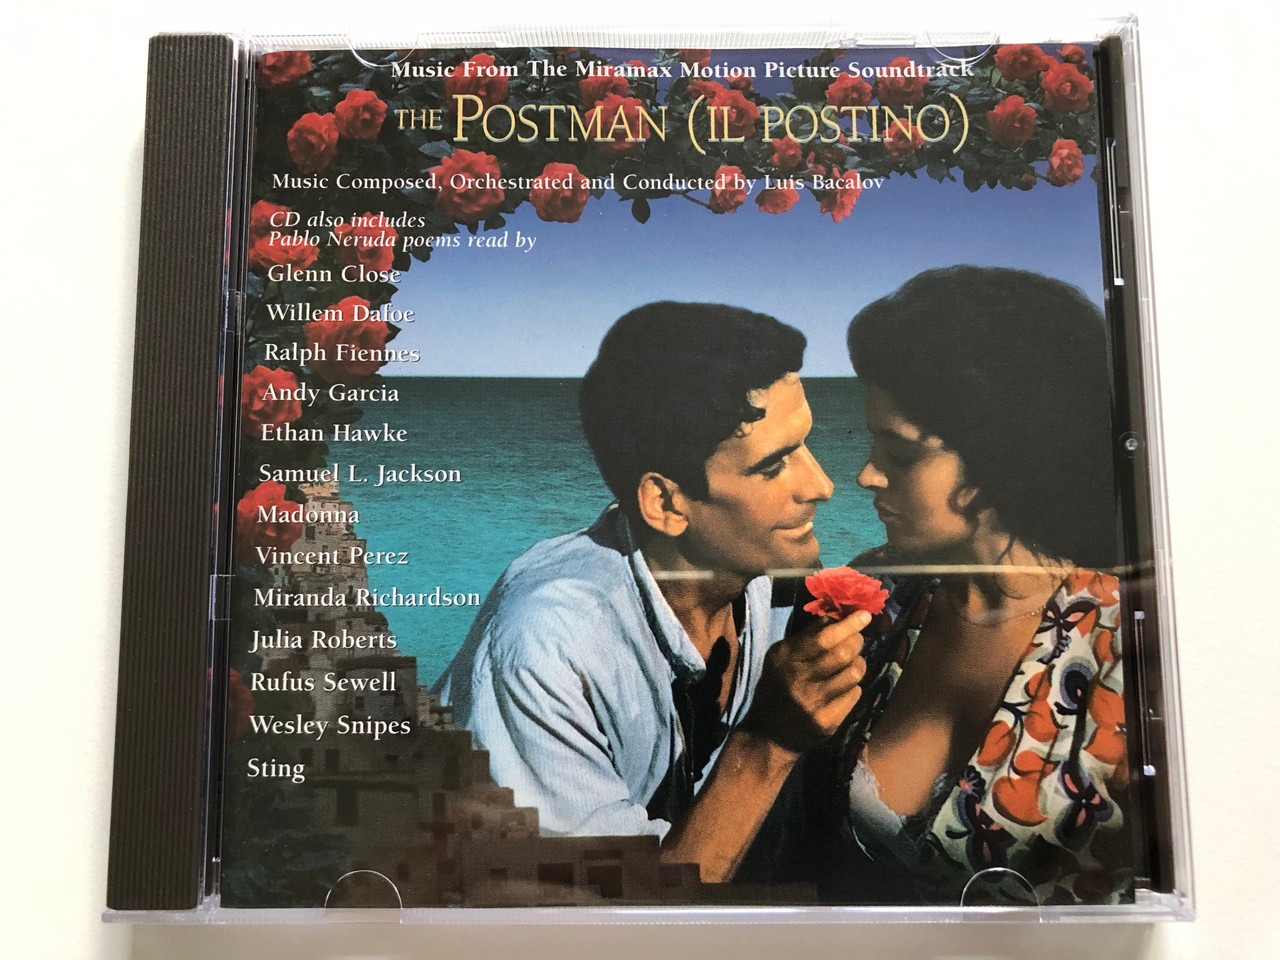 https://cdn10.bigcommerce.com/s-62bdpkt7pb/products/30524/images/180425/The_Postman_Il_Postino_Music_From_The_Miramax_Motion_Picture_Soundtrack_Music_composed_orchestrated_and_conducted_by_Luis_Bacalov_Miramax_Records_Audio_CD_1994_162_026-2_1__54334.1623089666.1280.1280.JPG?c=2&_ga=2.242239748.700277554.1623167661-252145610.1623167661